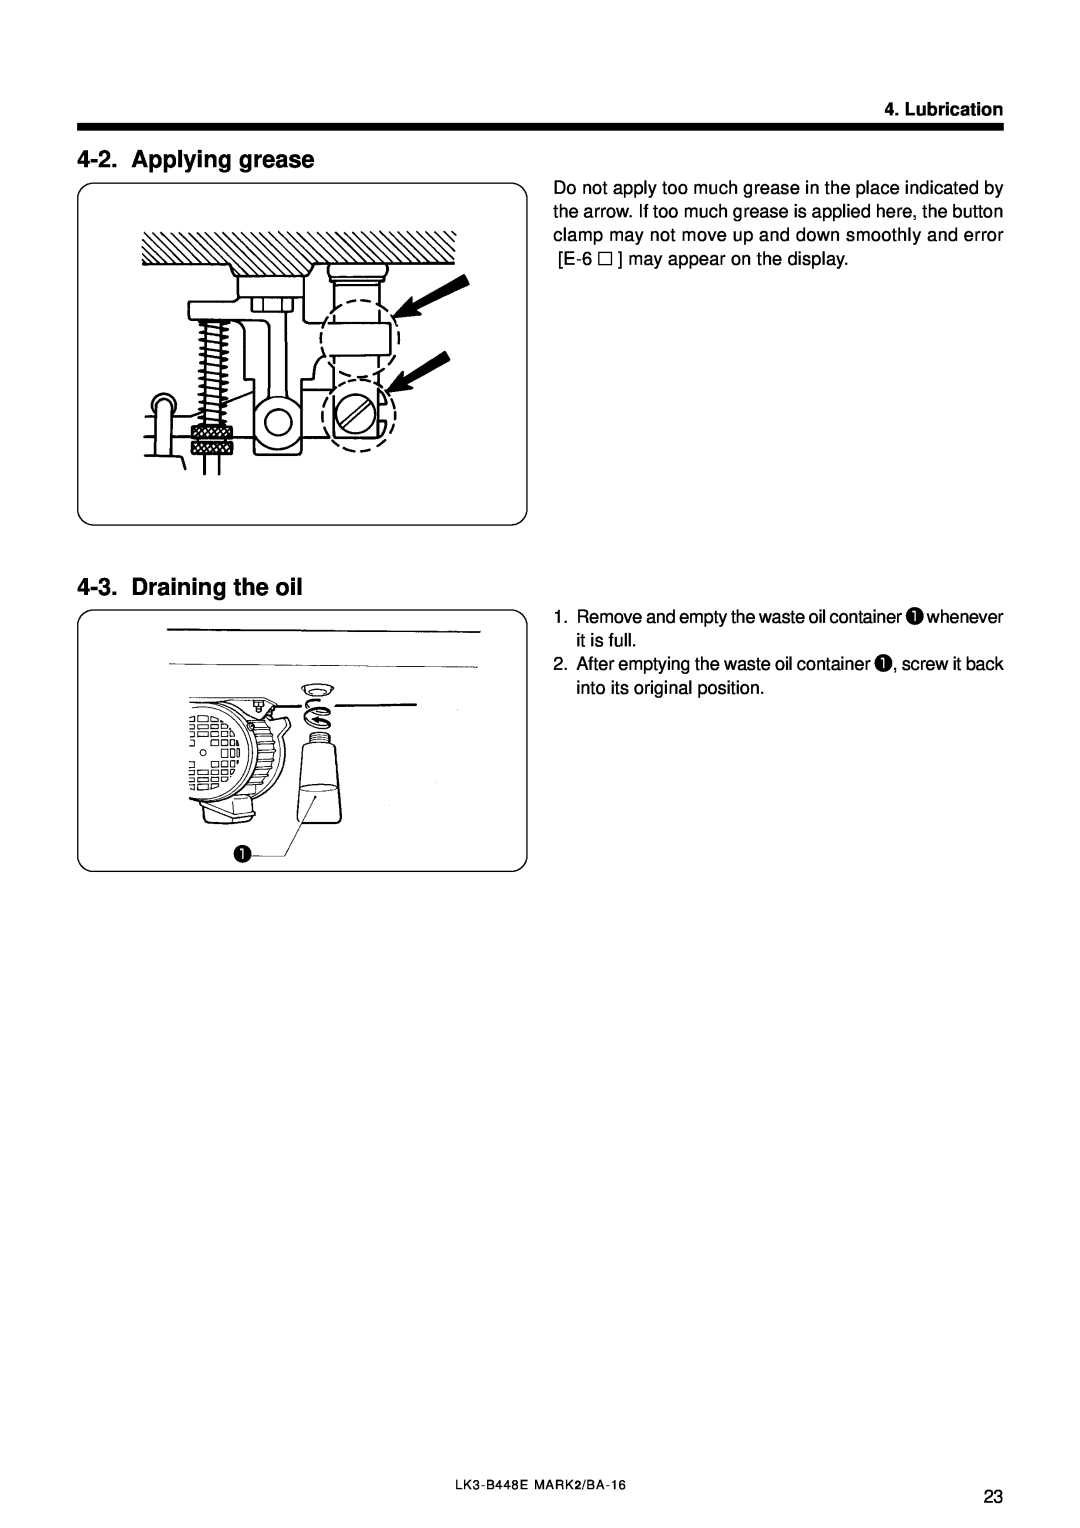 Brother LK3-B448E instruction manual Applying grease, Draining the oil, Lubrication 